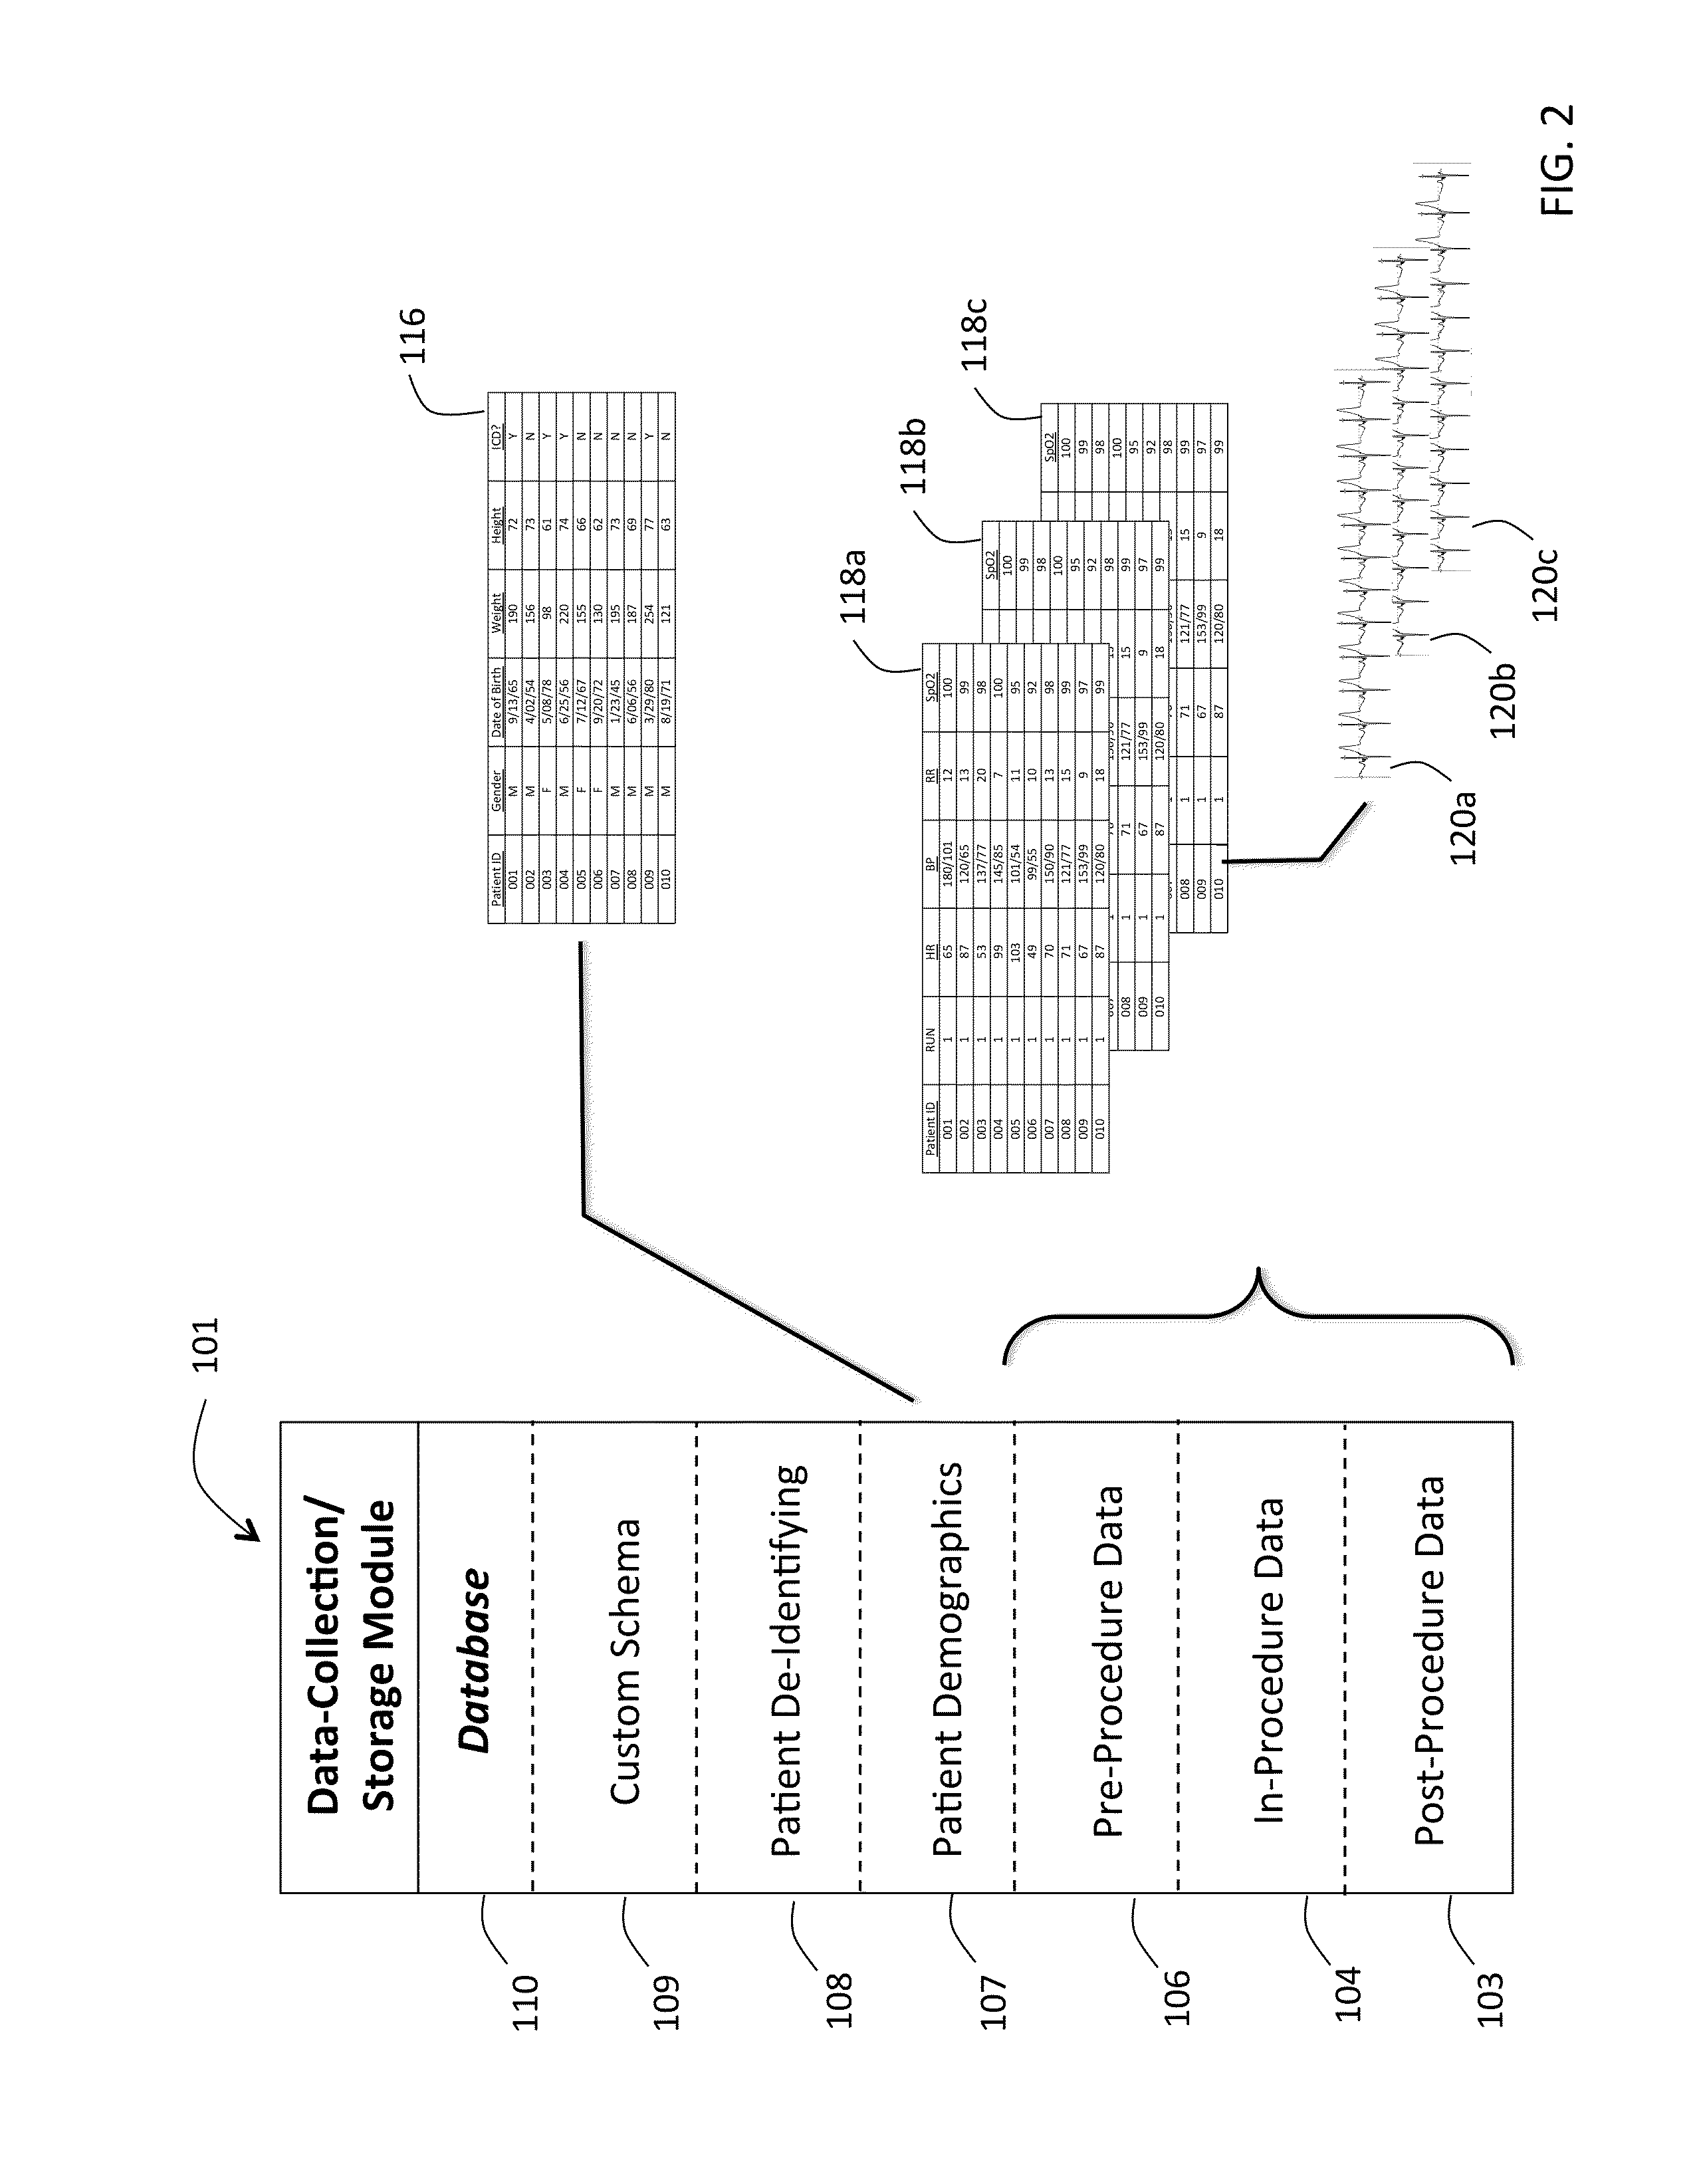 Internet-based system for collecting and analyzing data before, during, and after a cardiovascular procedure